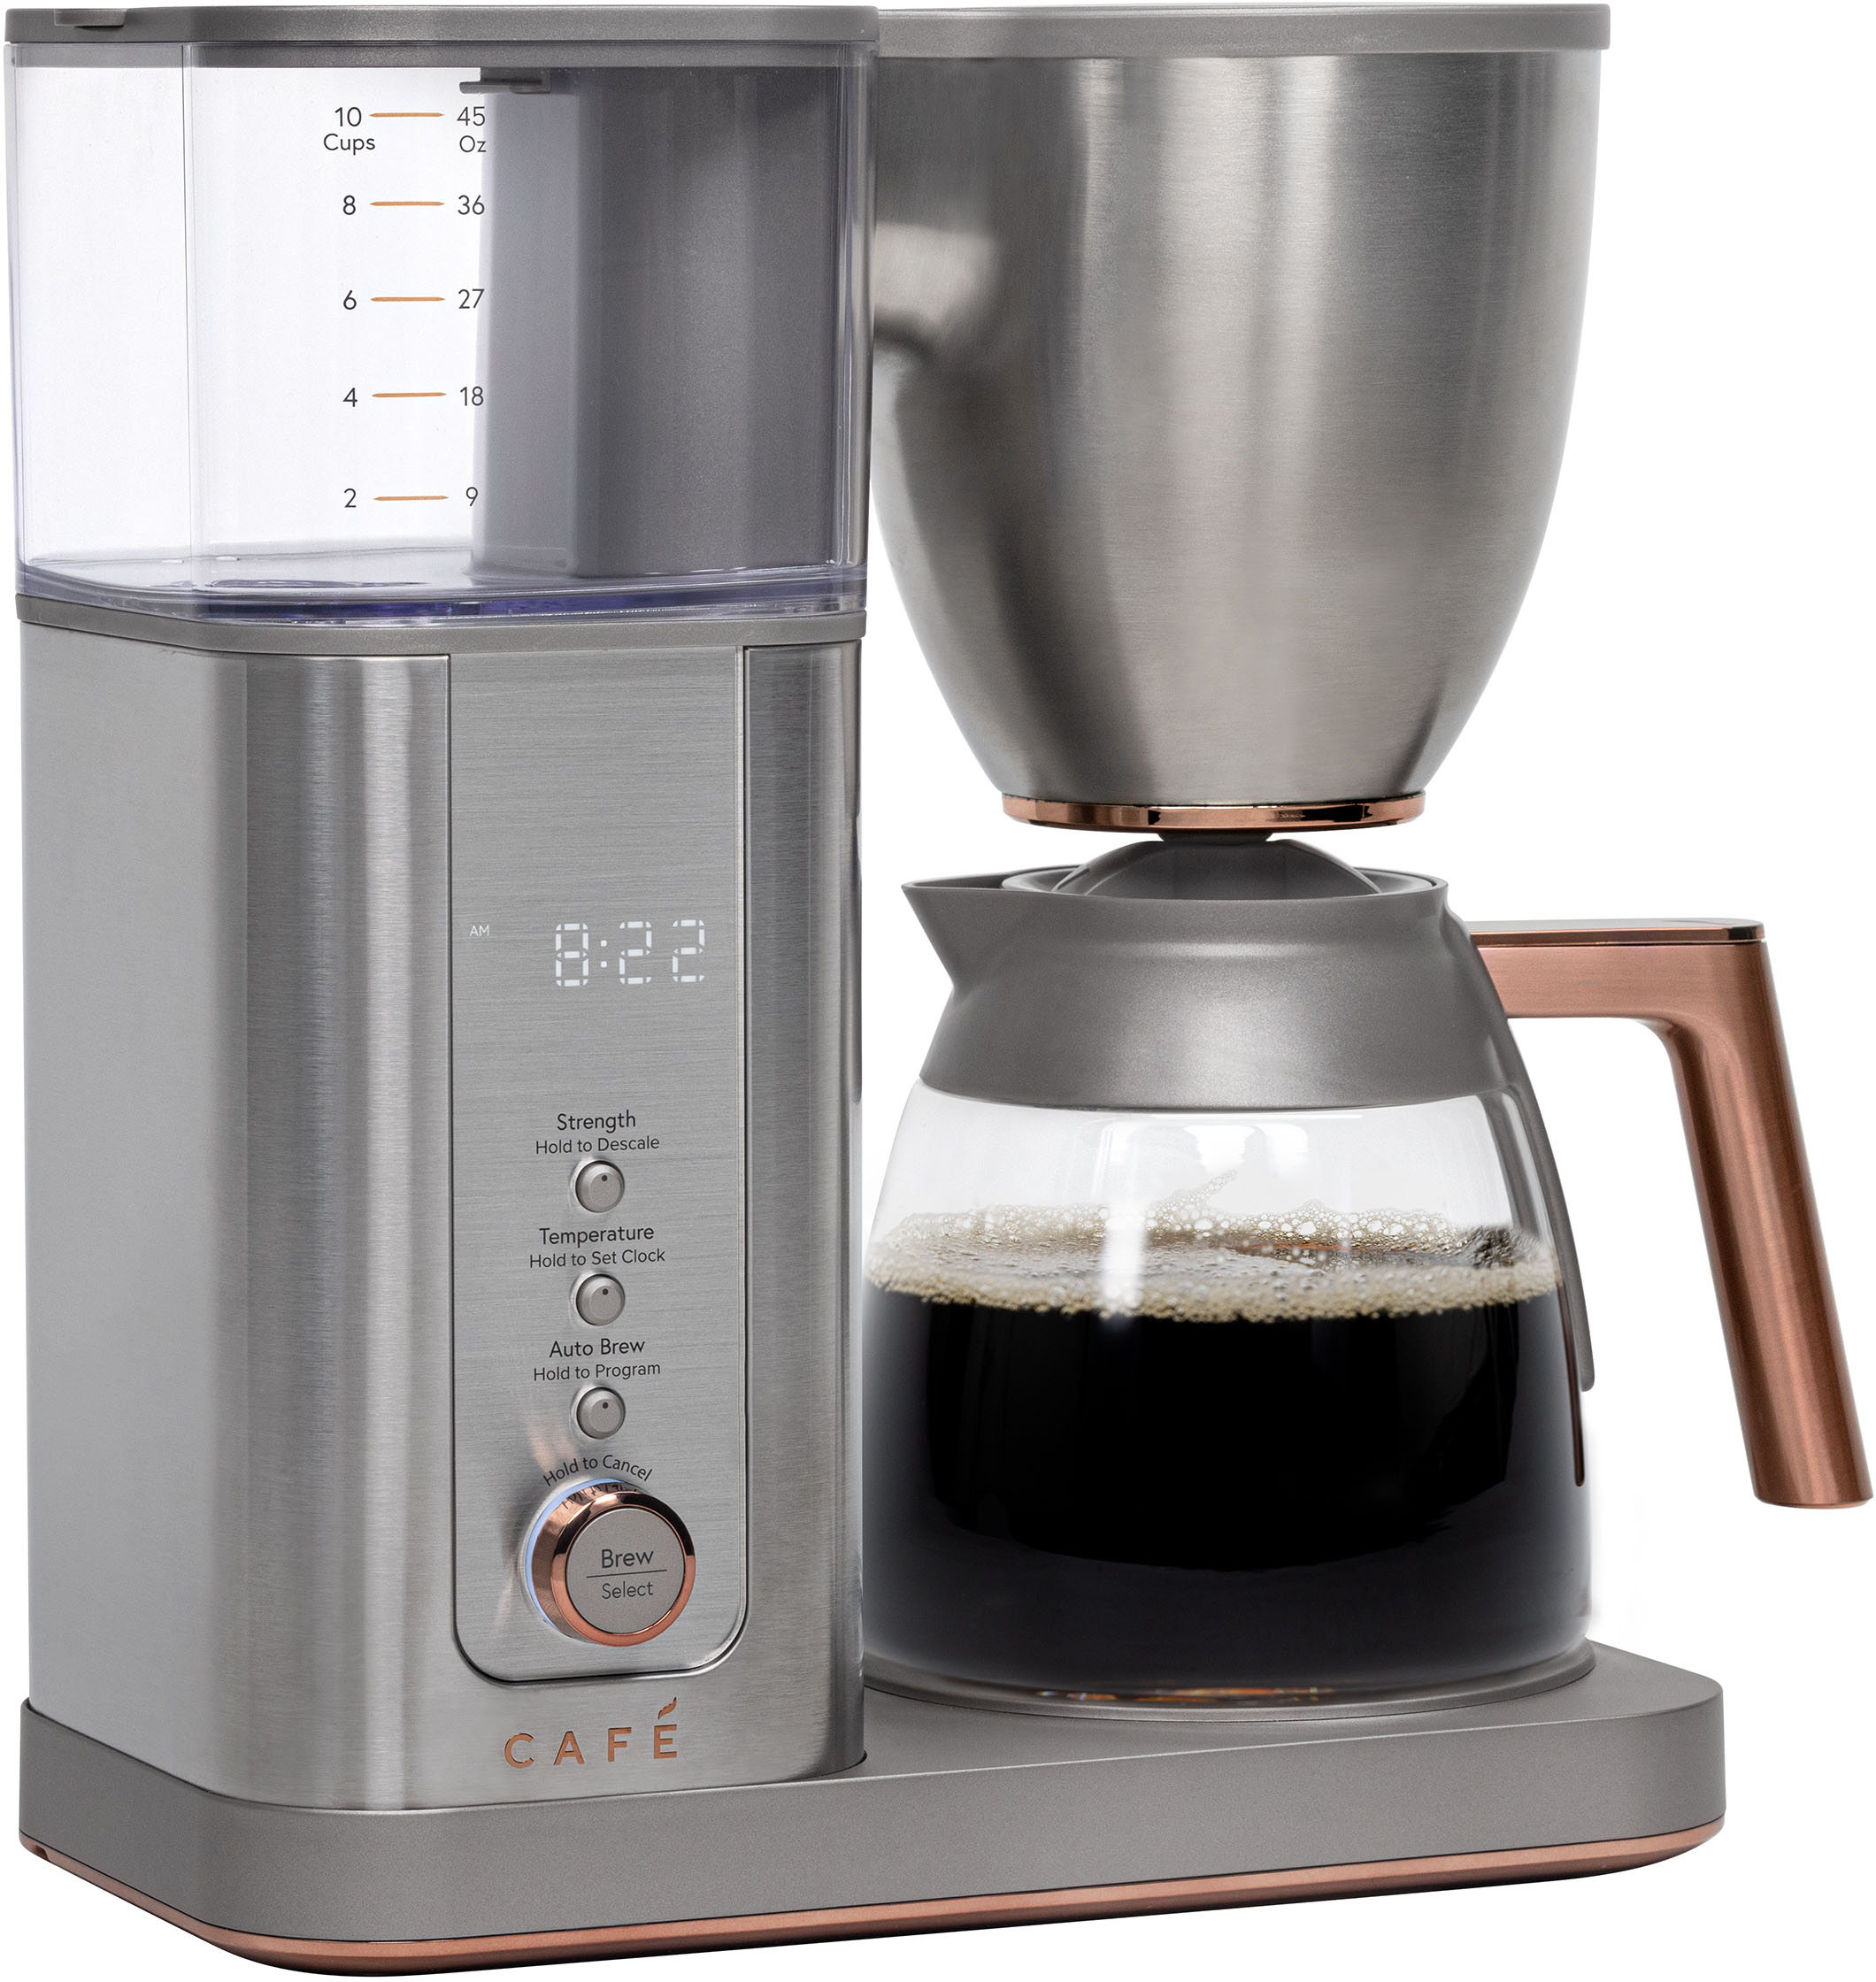 Angle View: Café - Smart Drip 10-Cup Coffee Maker with WiFi - Stainless Steel